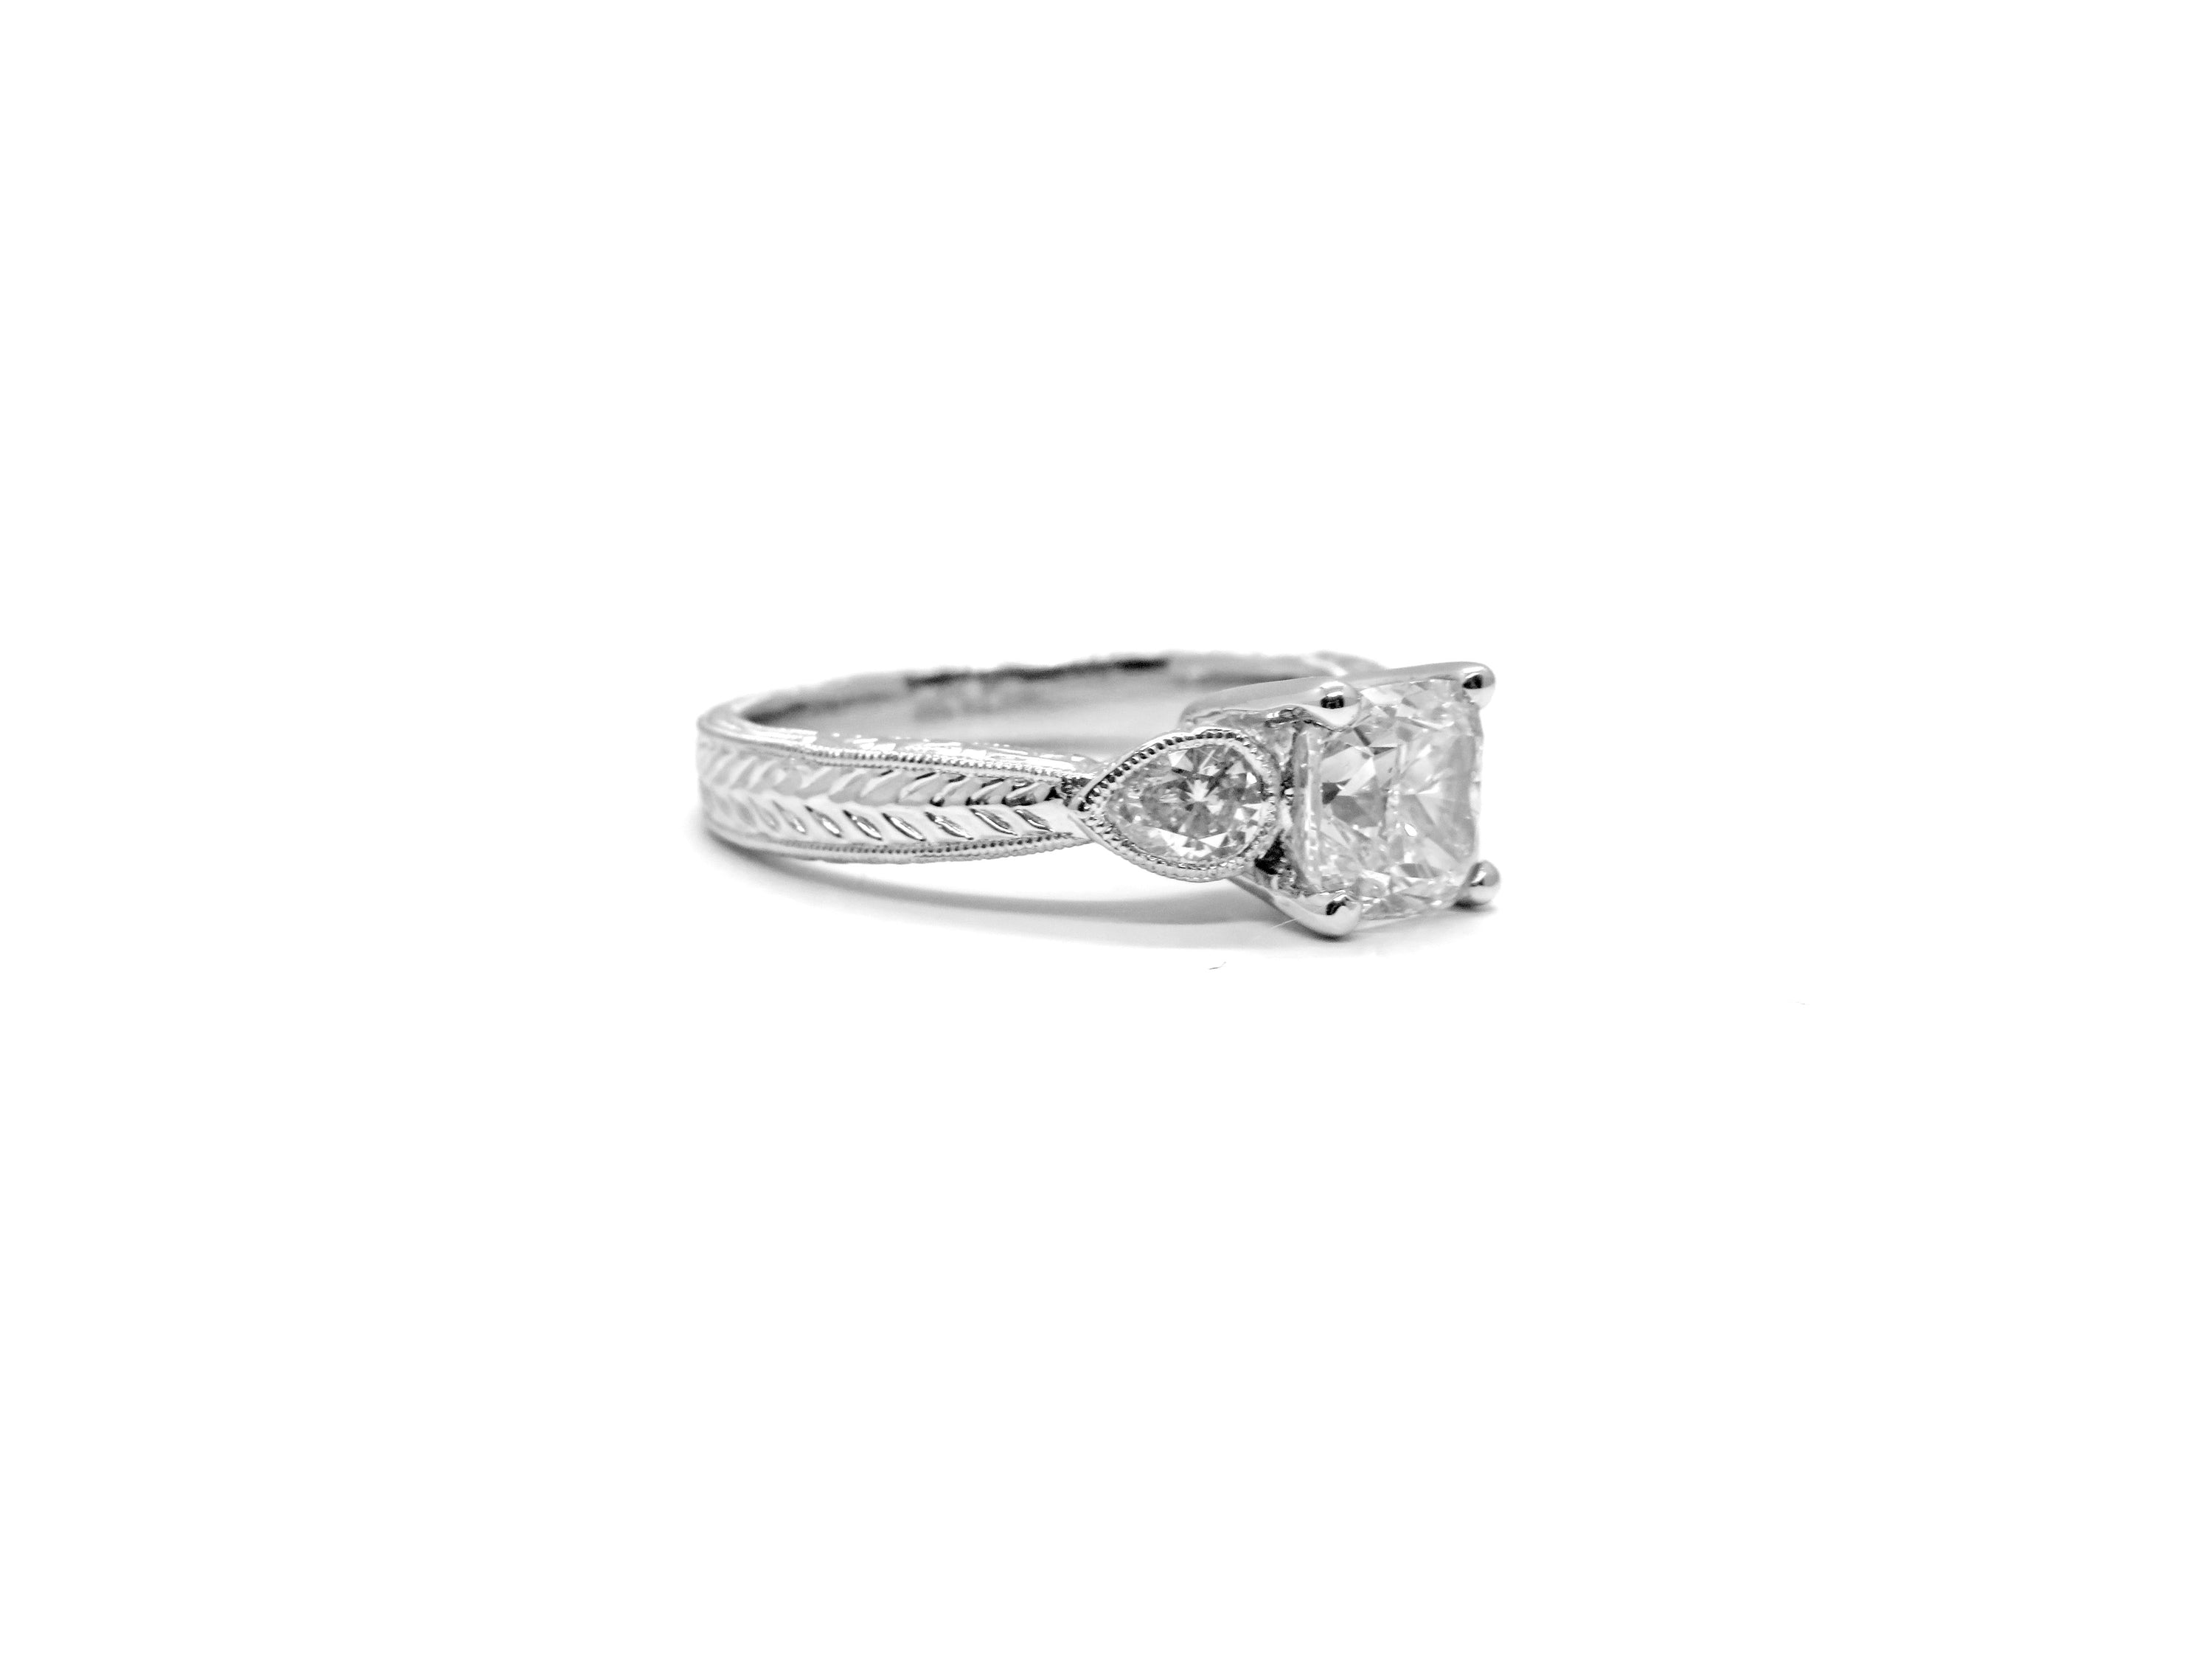 Platinum Engagement Ring with 1ct Round Brilliant Cut and Two Pear Shape Diamonds